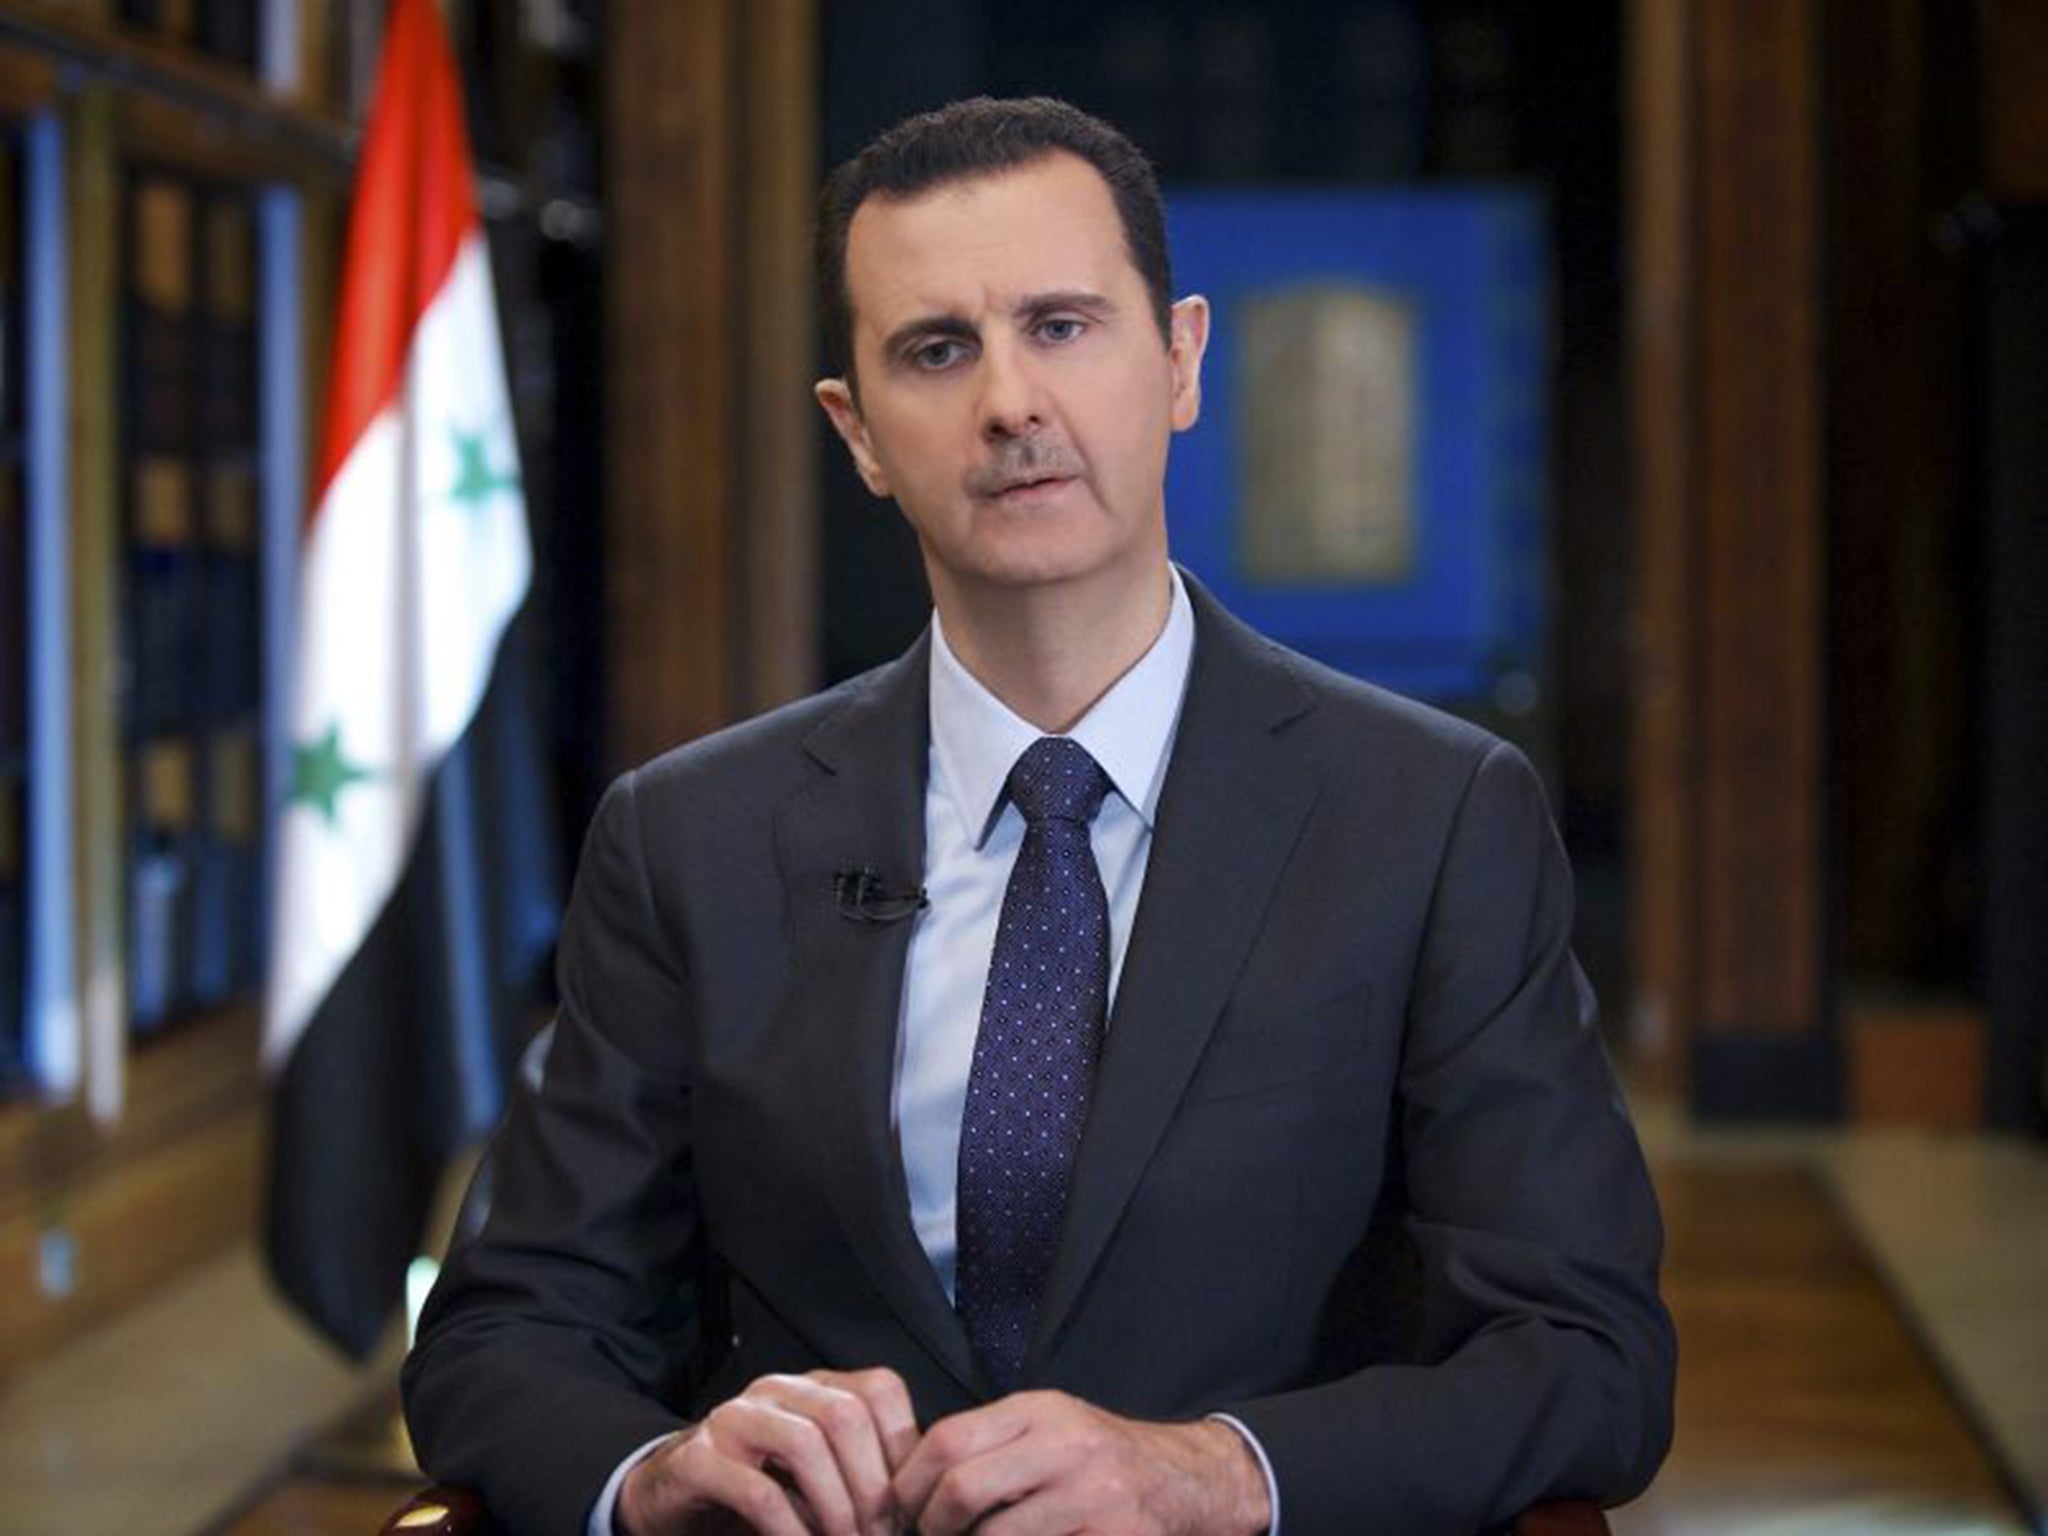 President Bashar al-Assad could be allowed to remain in power for an interim period under plans to be debated by world leaders